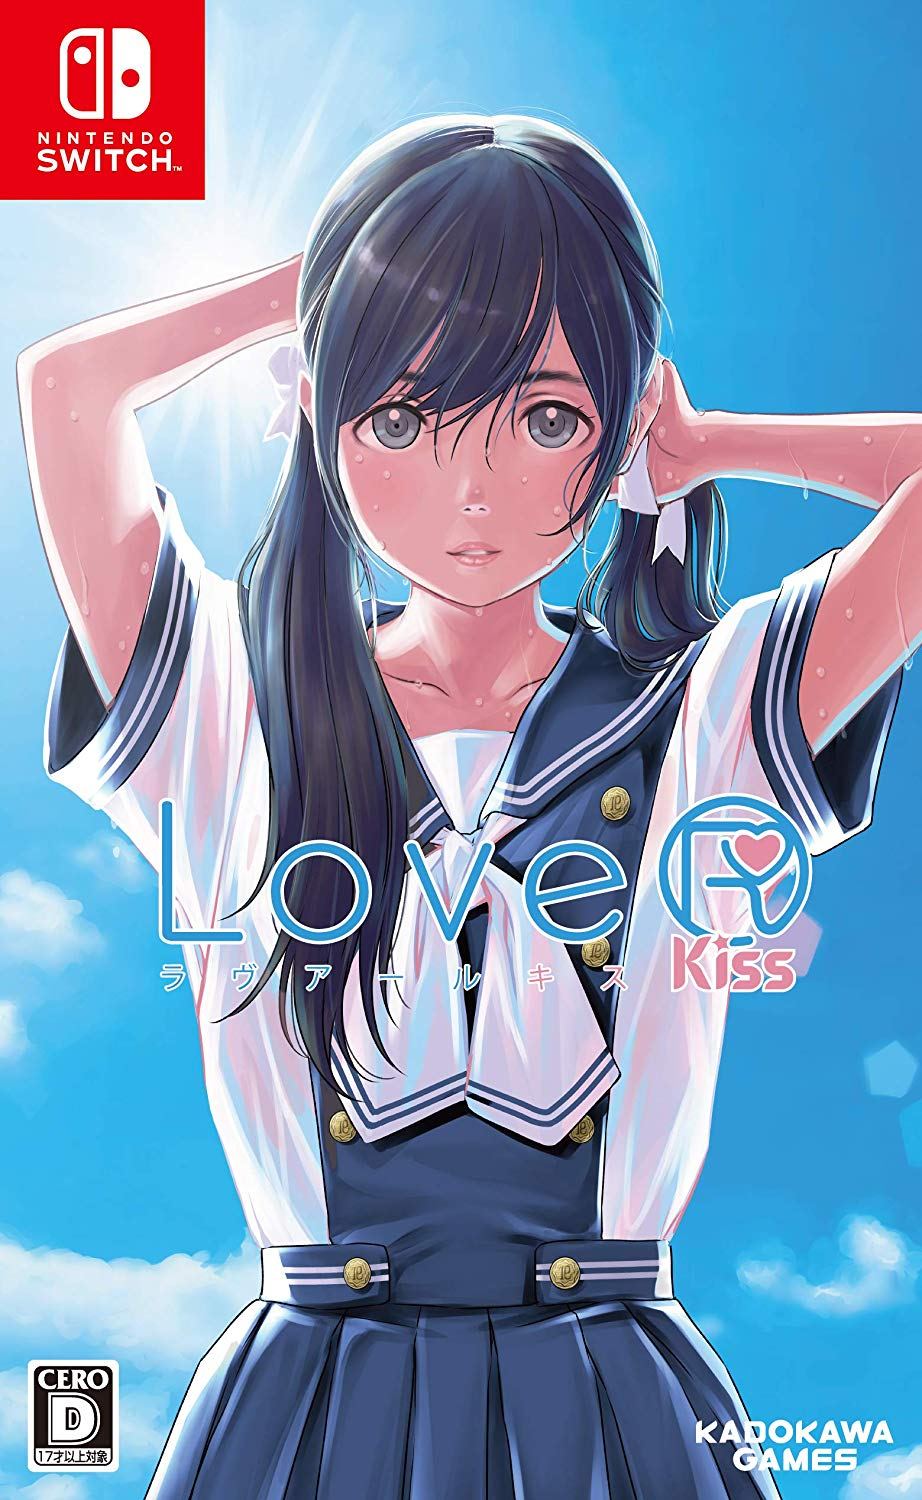 LoveR Kiss for Nintendo Switch